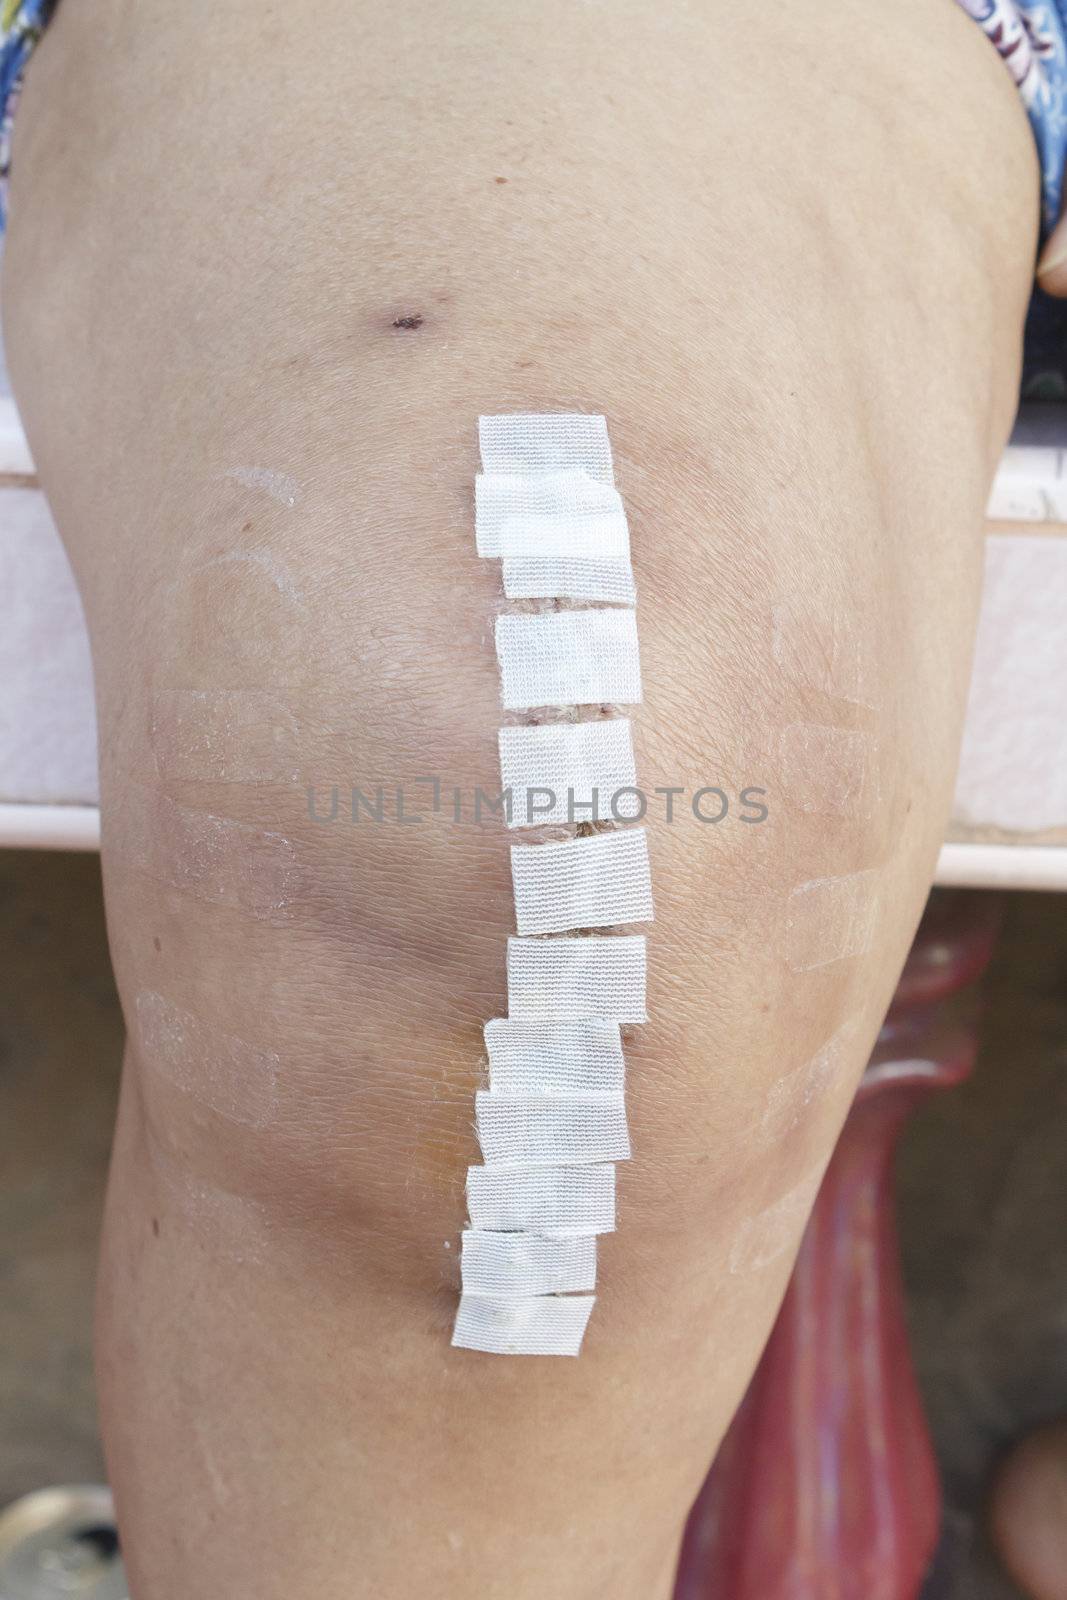 Knee replacement incision by olovedog